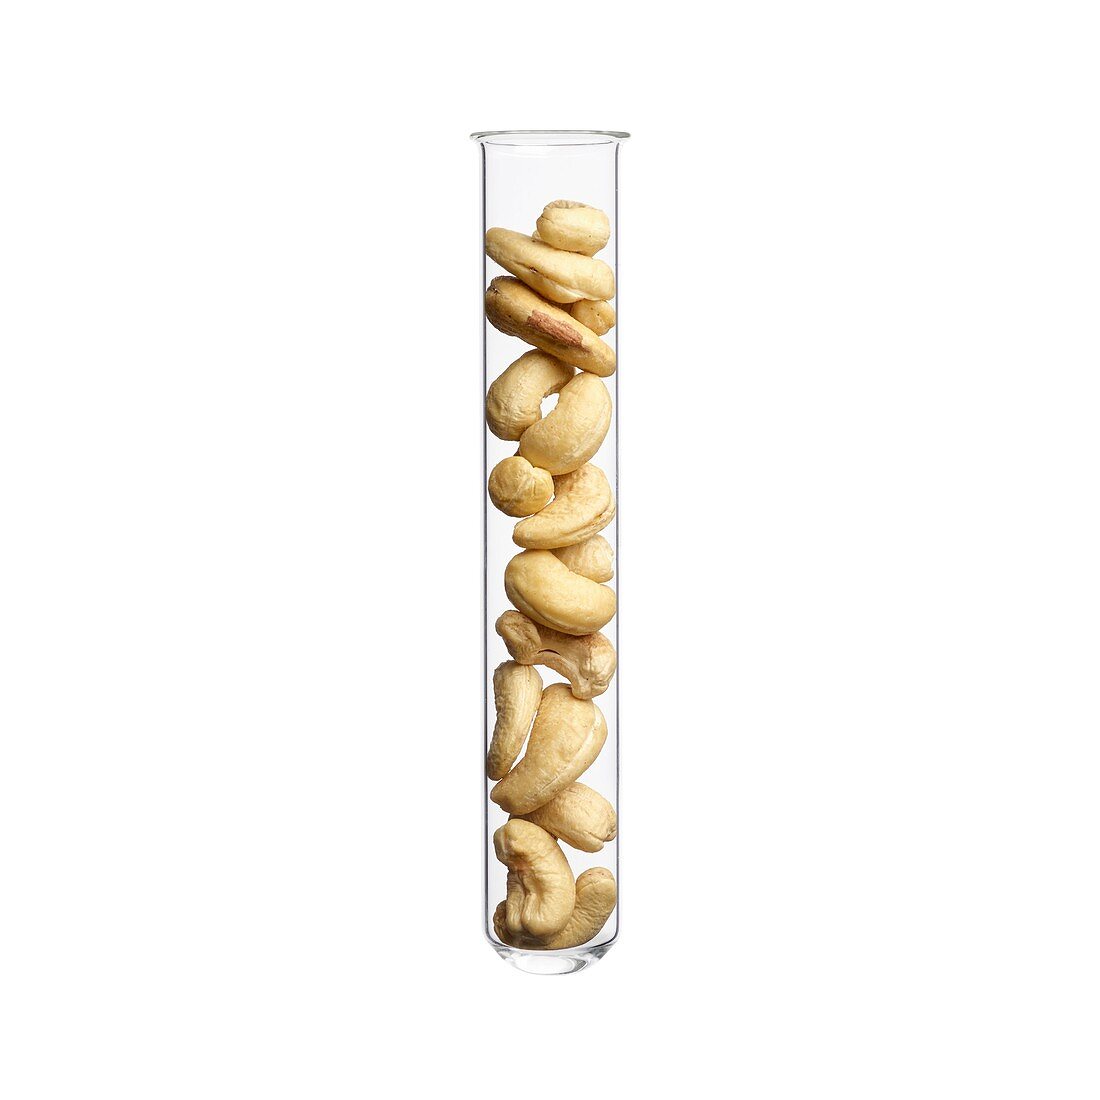 Cashew nuts in test tube